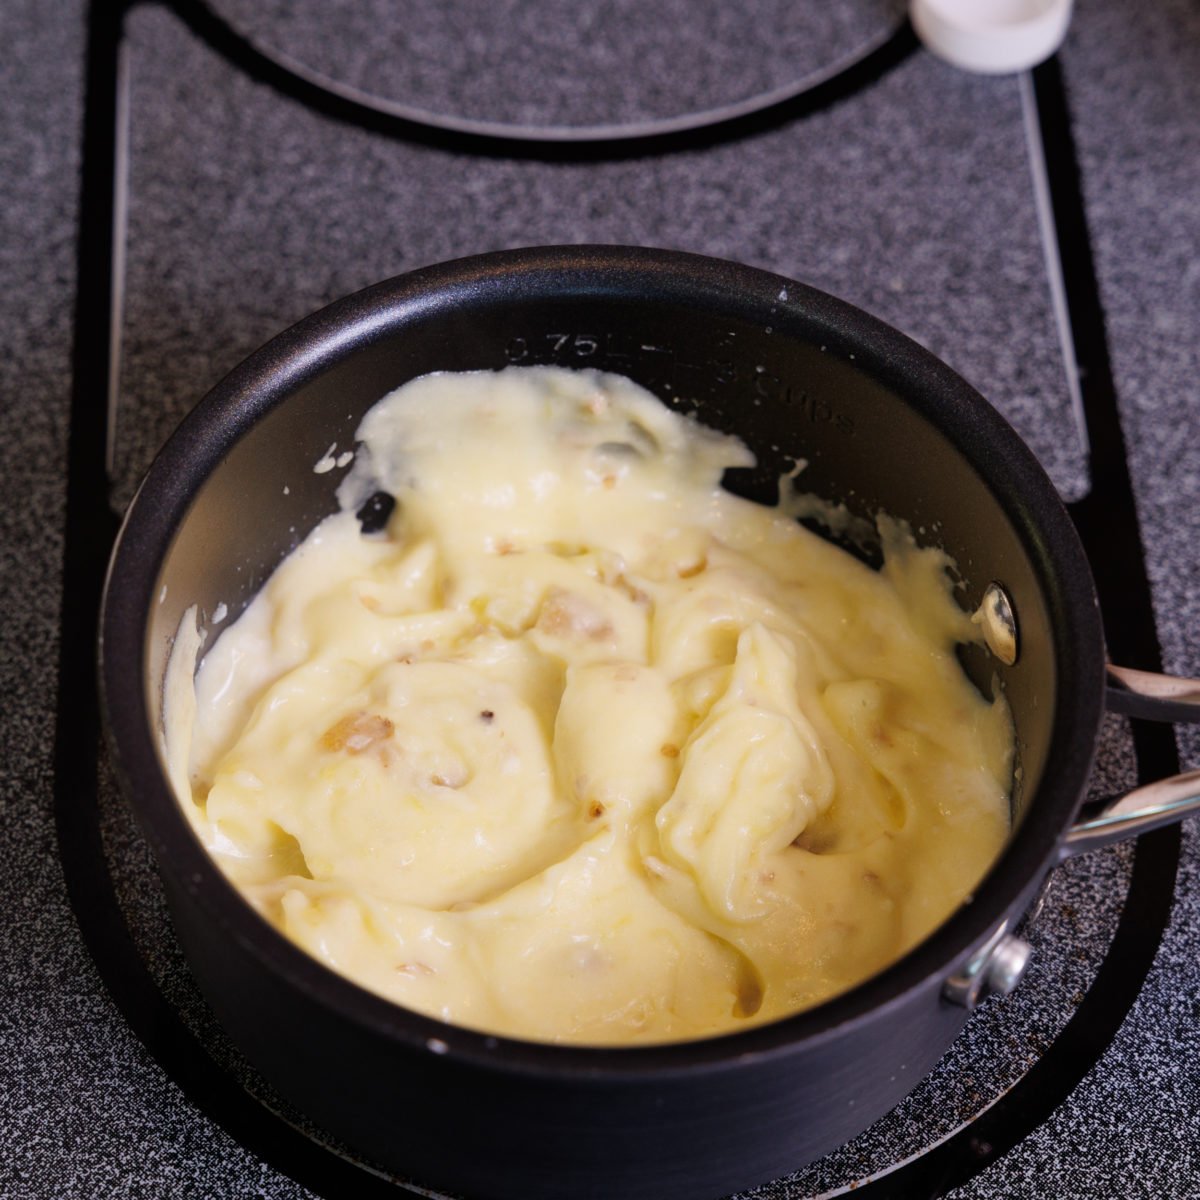 mashed potatoes in a small black pot.